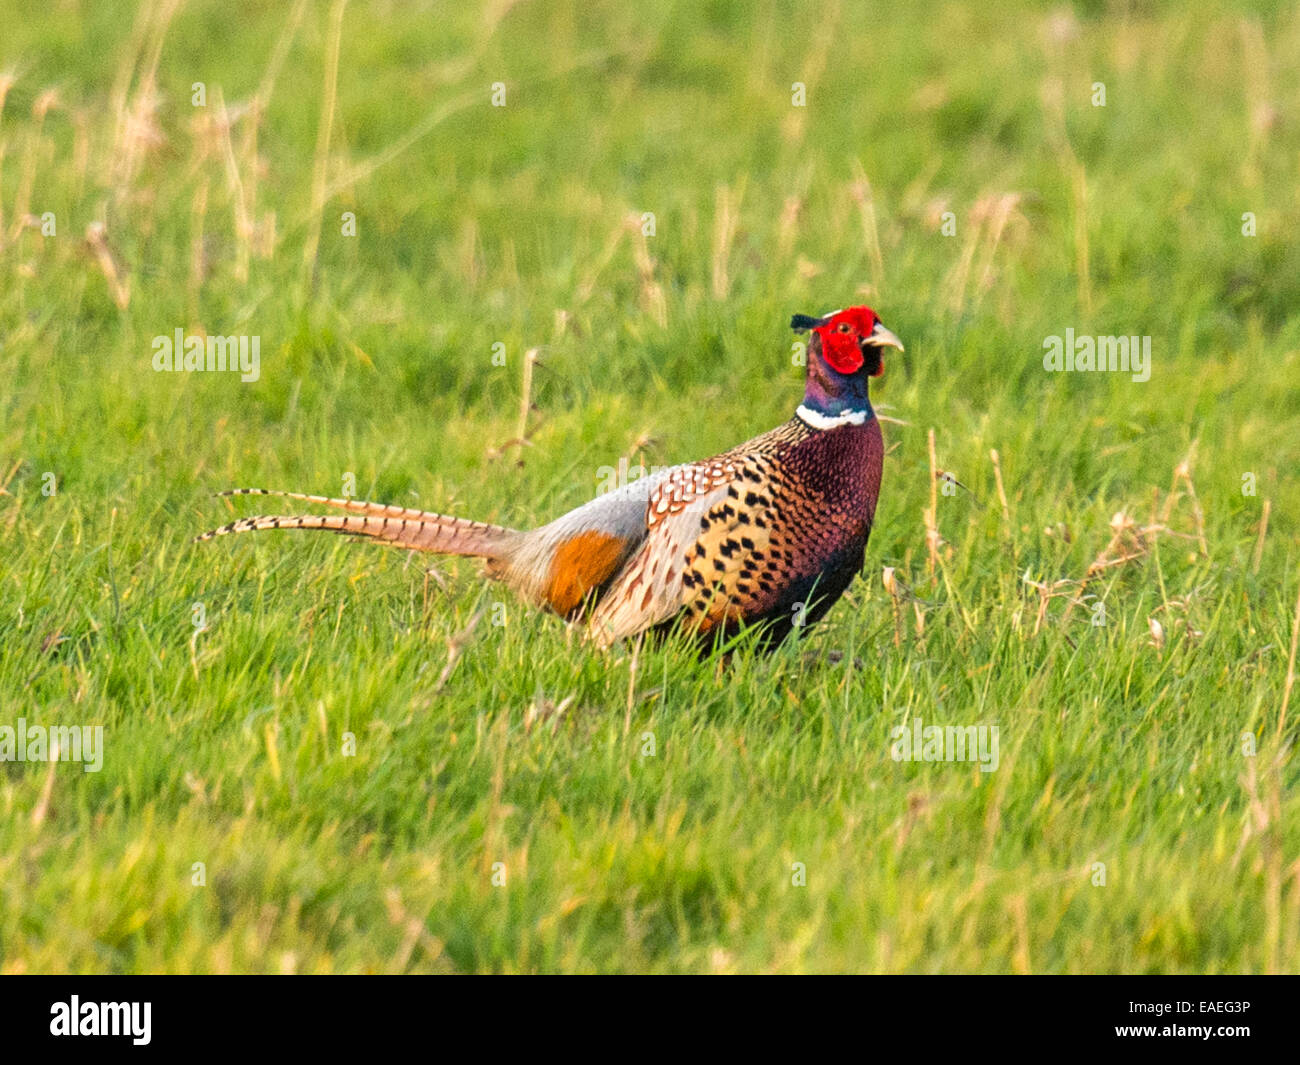 A wild Pheasant [Phasianinae] walks calmly across a green field attempting to catch the attention of a nearby female. Stock Photo